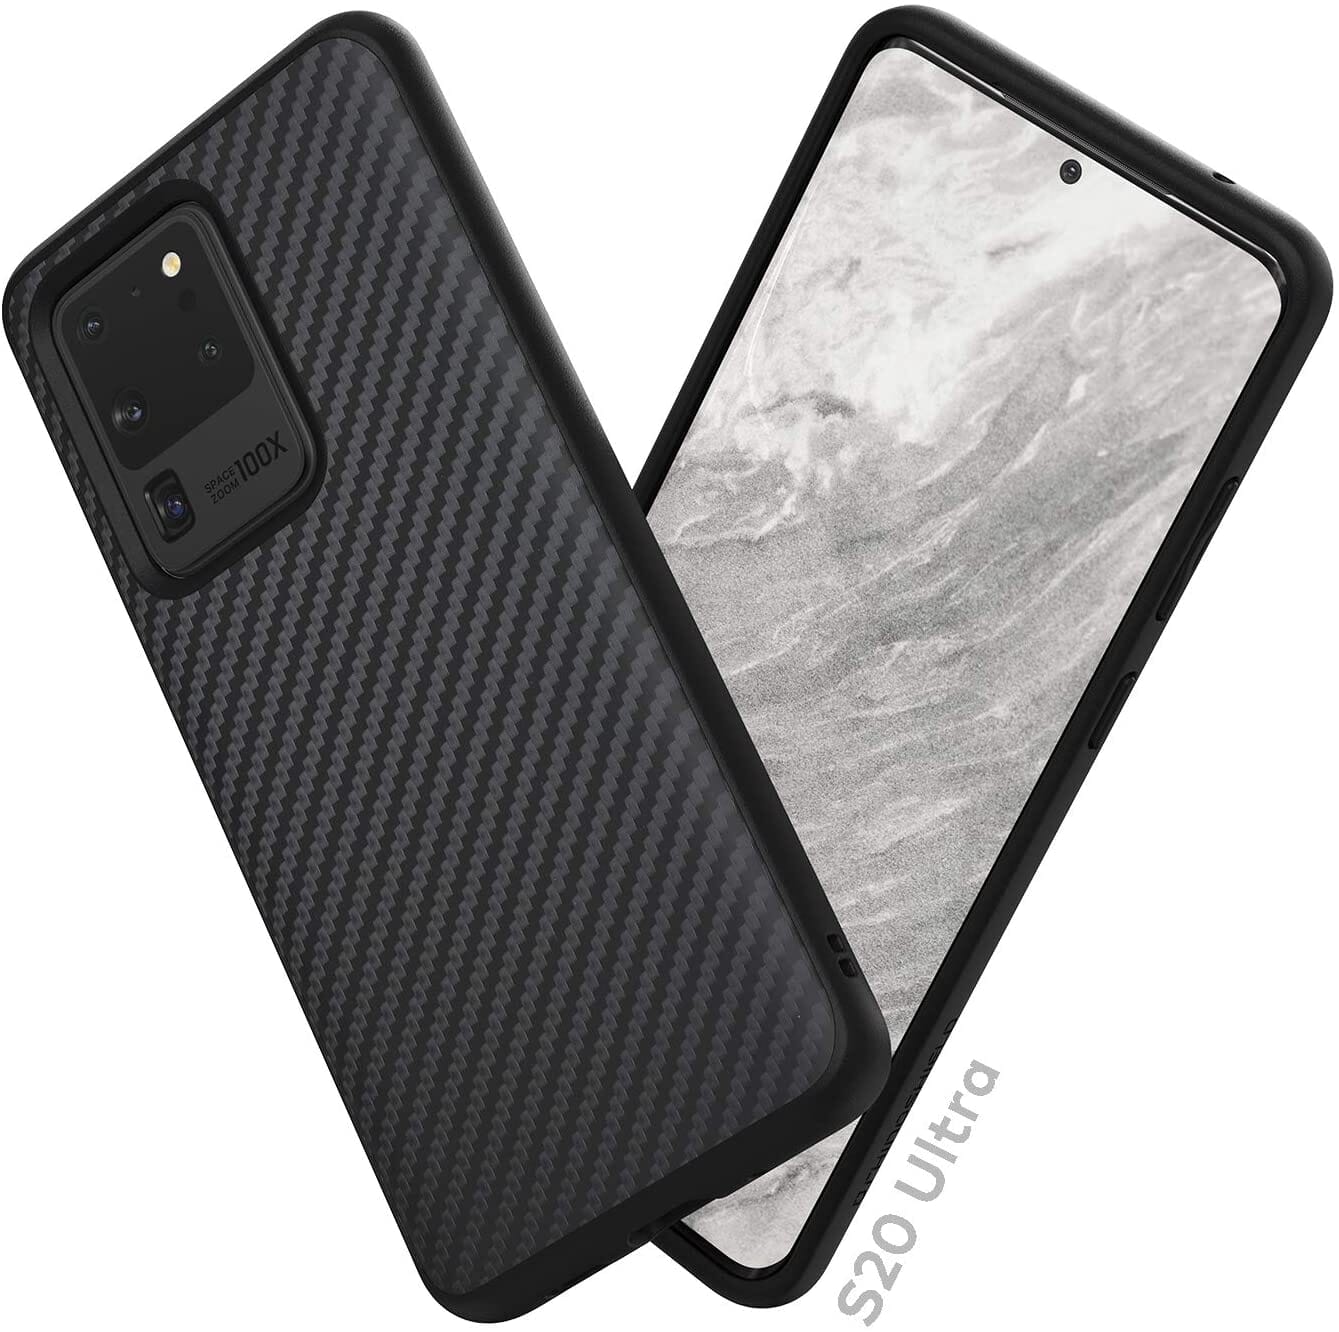 RhinoShield SolidSuit Protective Case with Premium Finish for Samsung Galaxy S20 Series Samsung S20 Series RhinoShield Carbon Fiber Samsung Galaxy S20 Ultra 